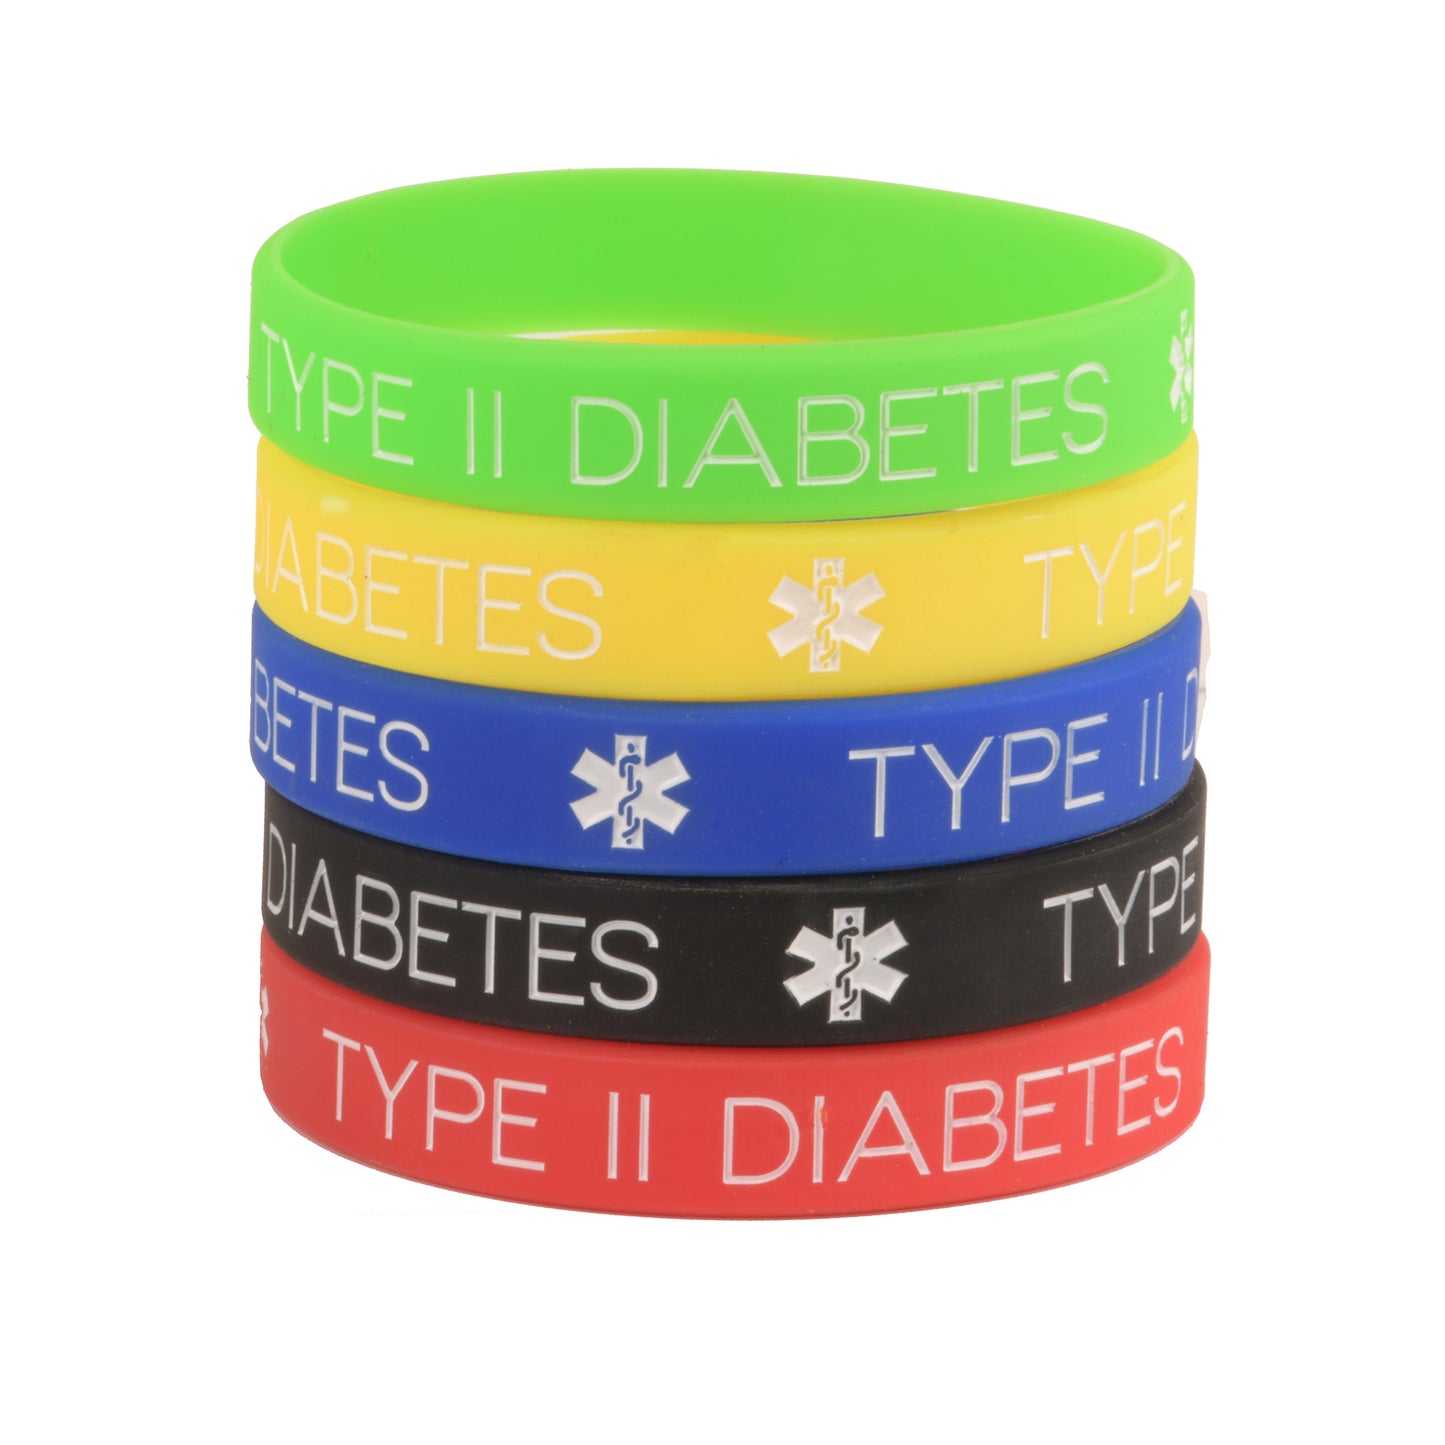 Type 2 Diabetes Bracelets Silicone Medical ID Wristbands (Pack of 5) One size for All